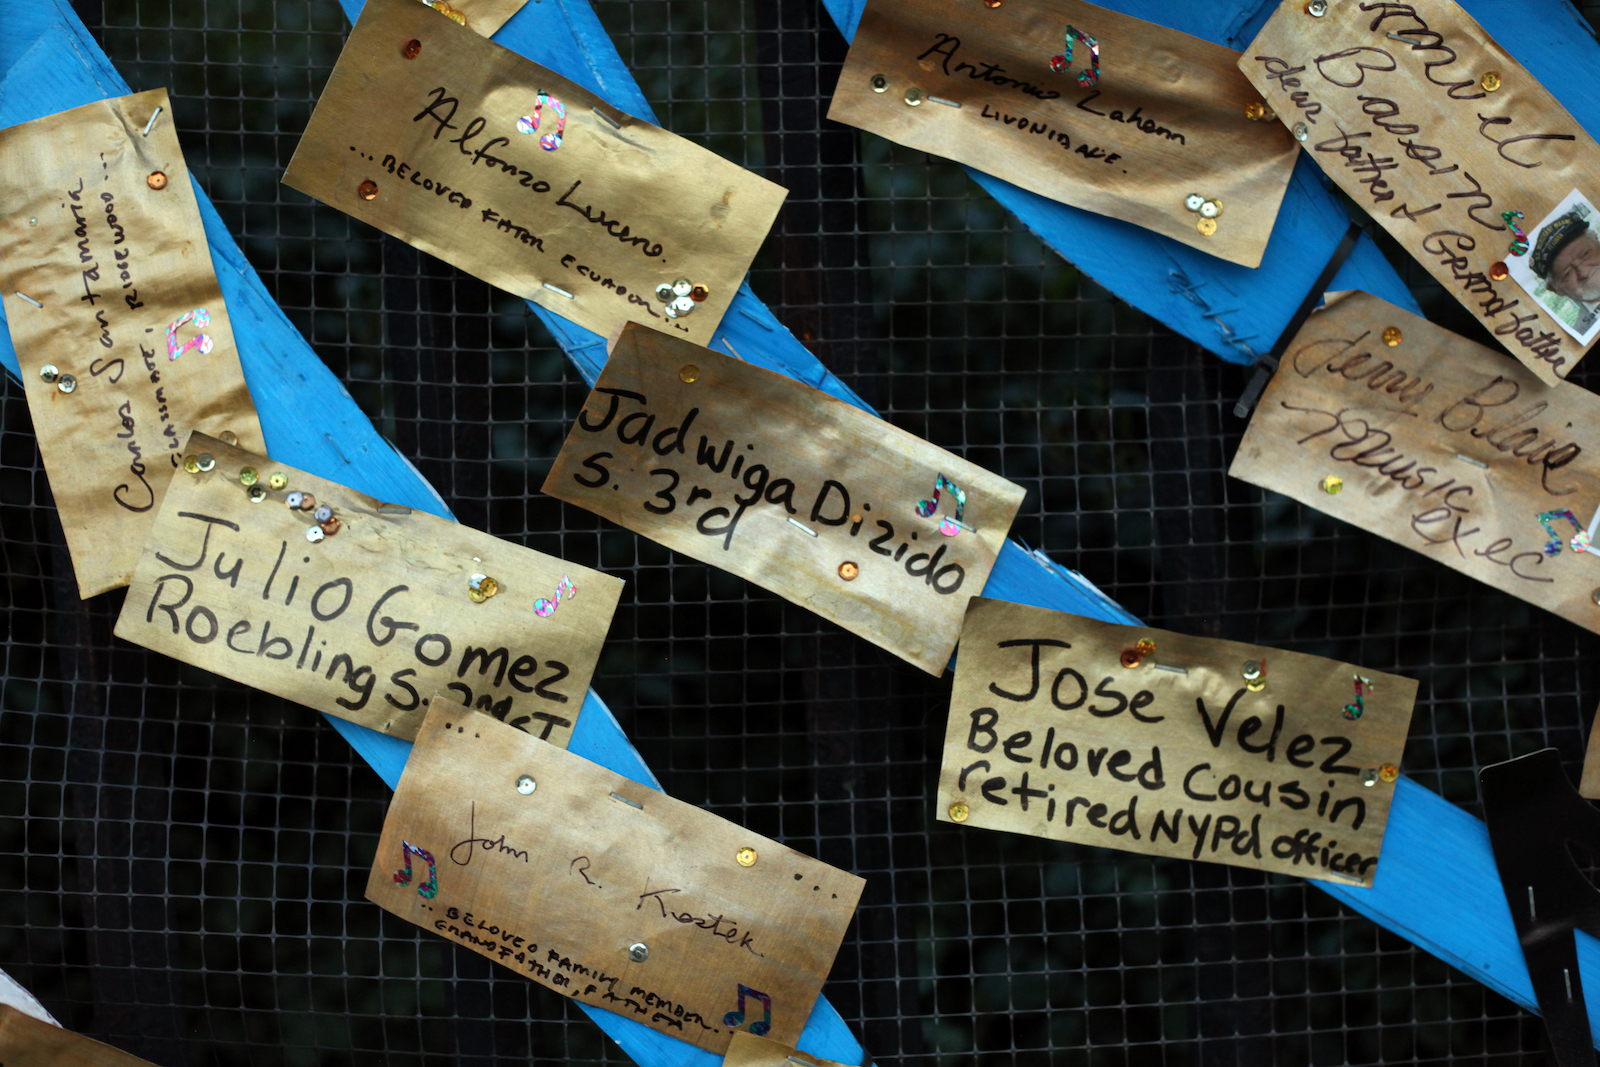 Names on brown paper attached to blue streamers: Jadwiga Dizido, Jose Velez, beloved cousin retired NYPD officer, Julio Gomez